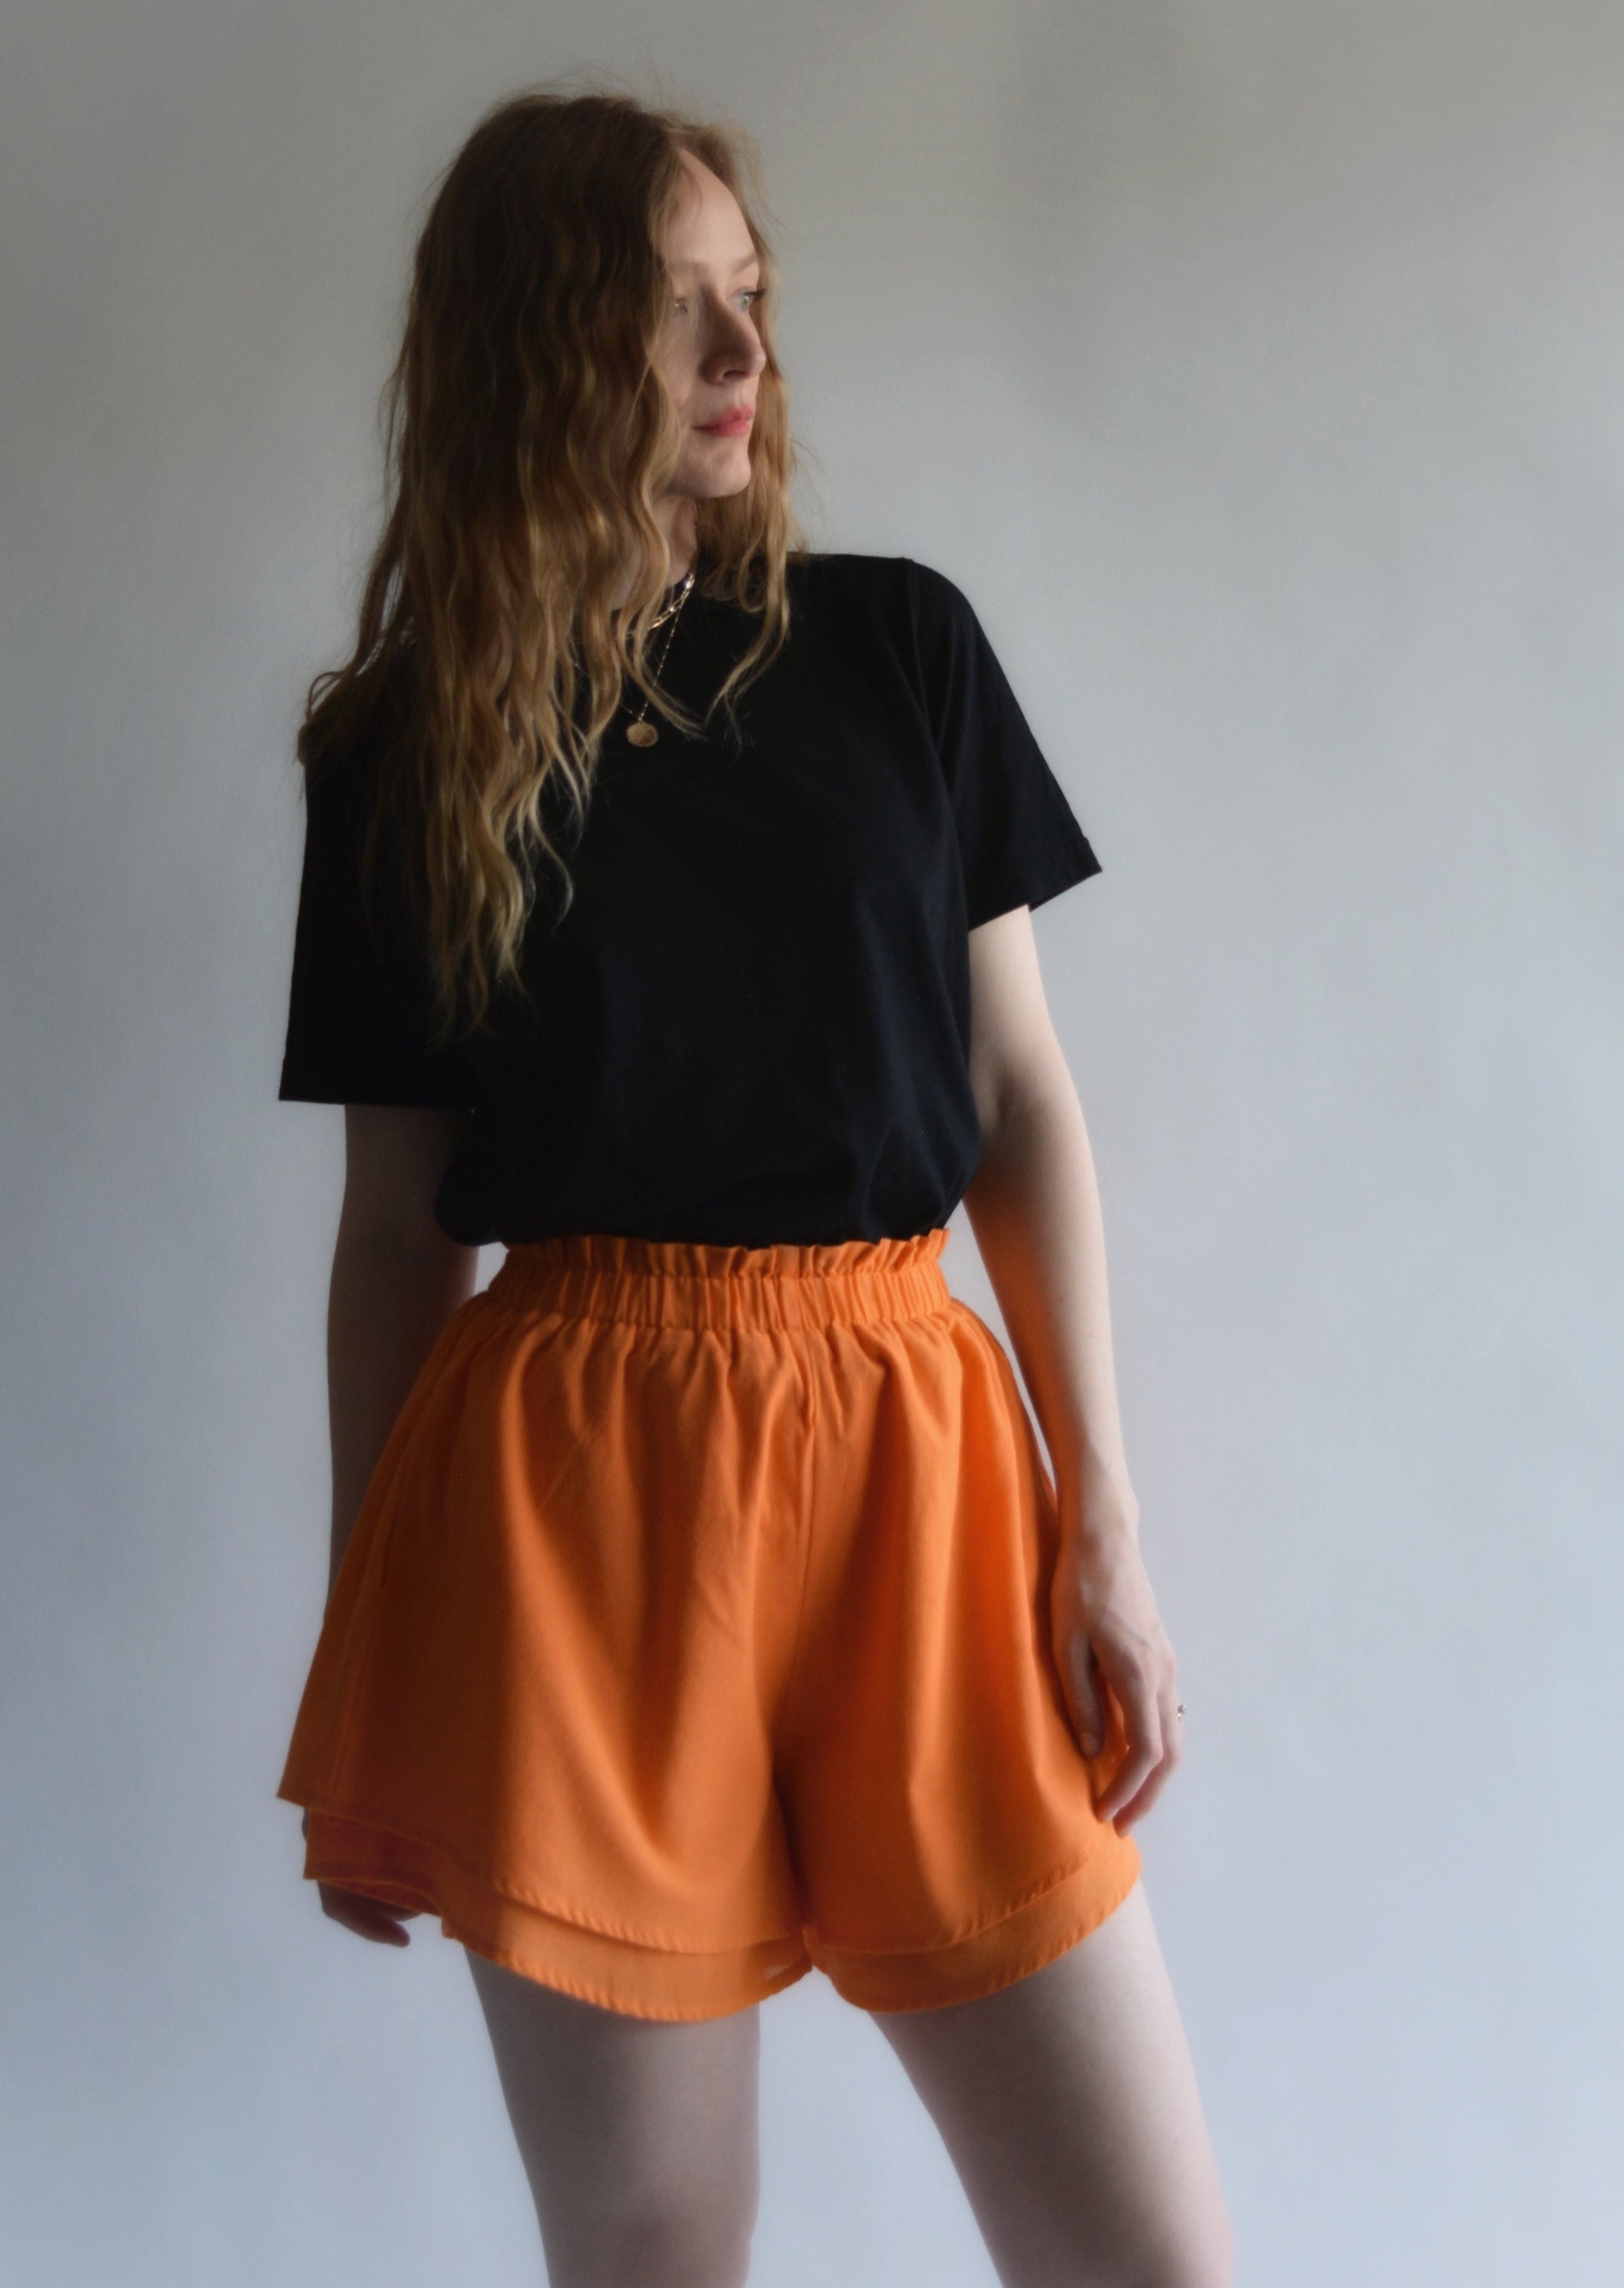 Cotton Shorts in Tangerine color